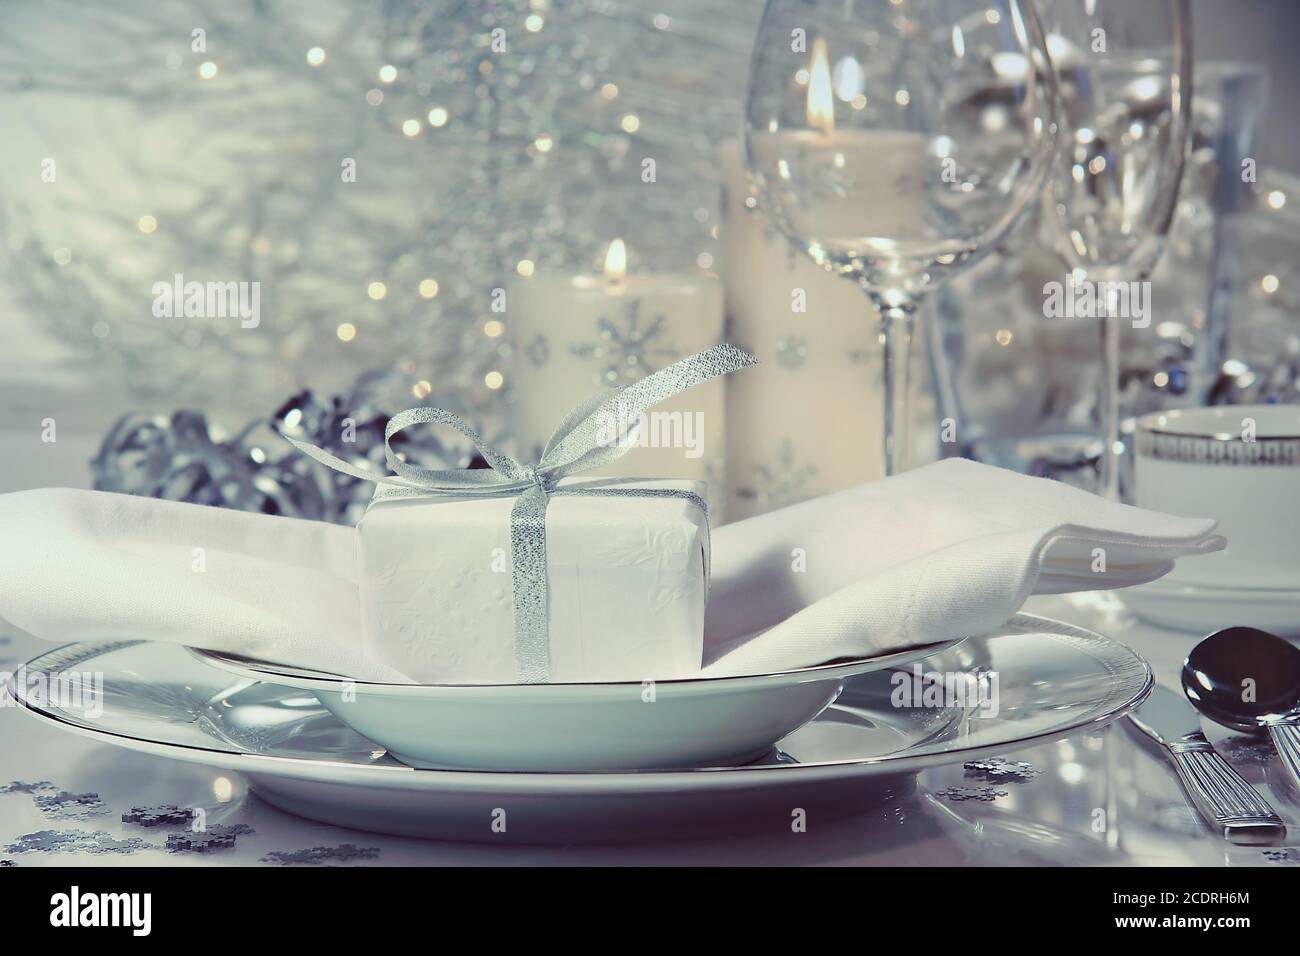 Festive dinner setting with gift Stock Photo